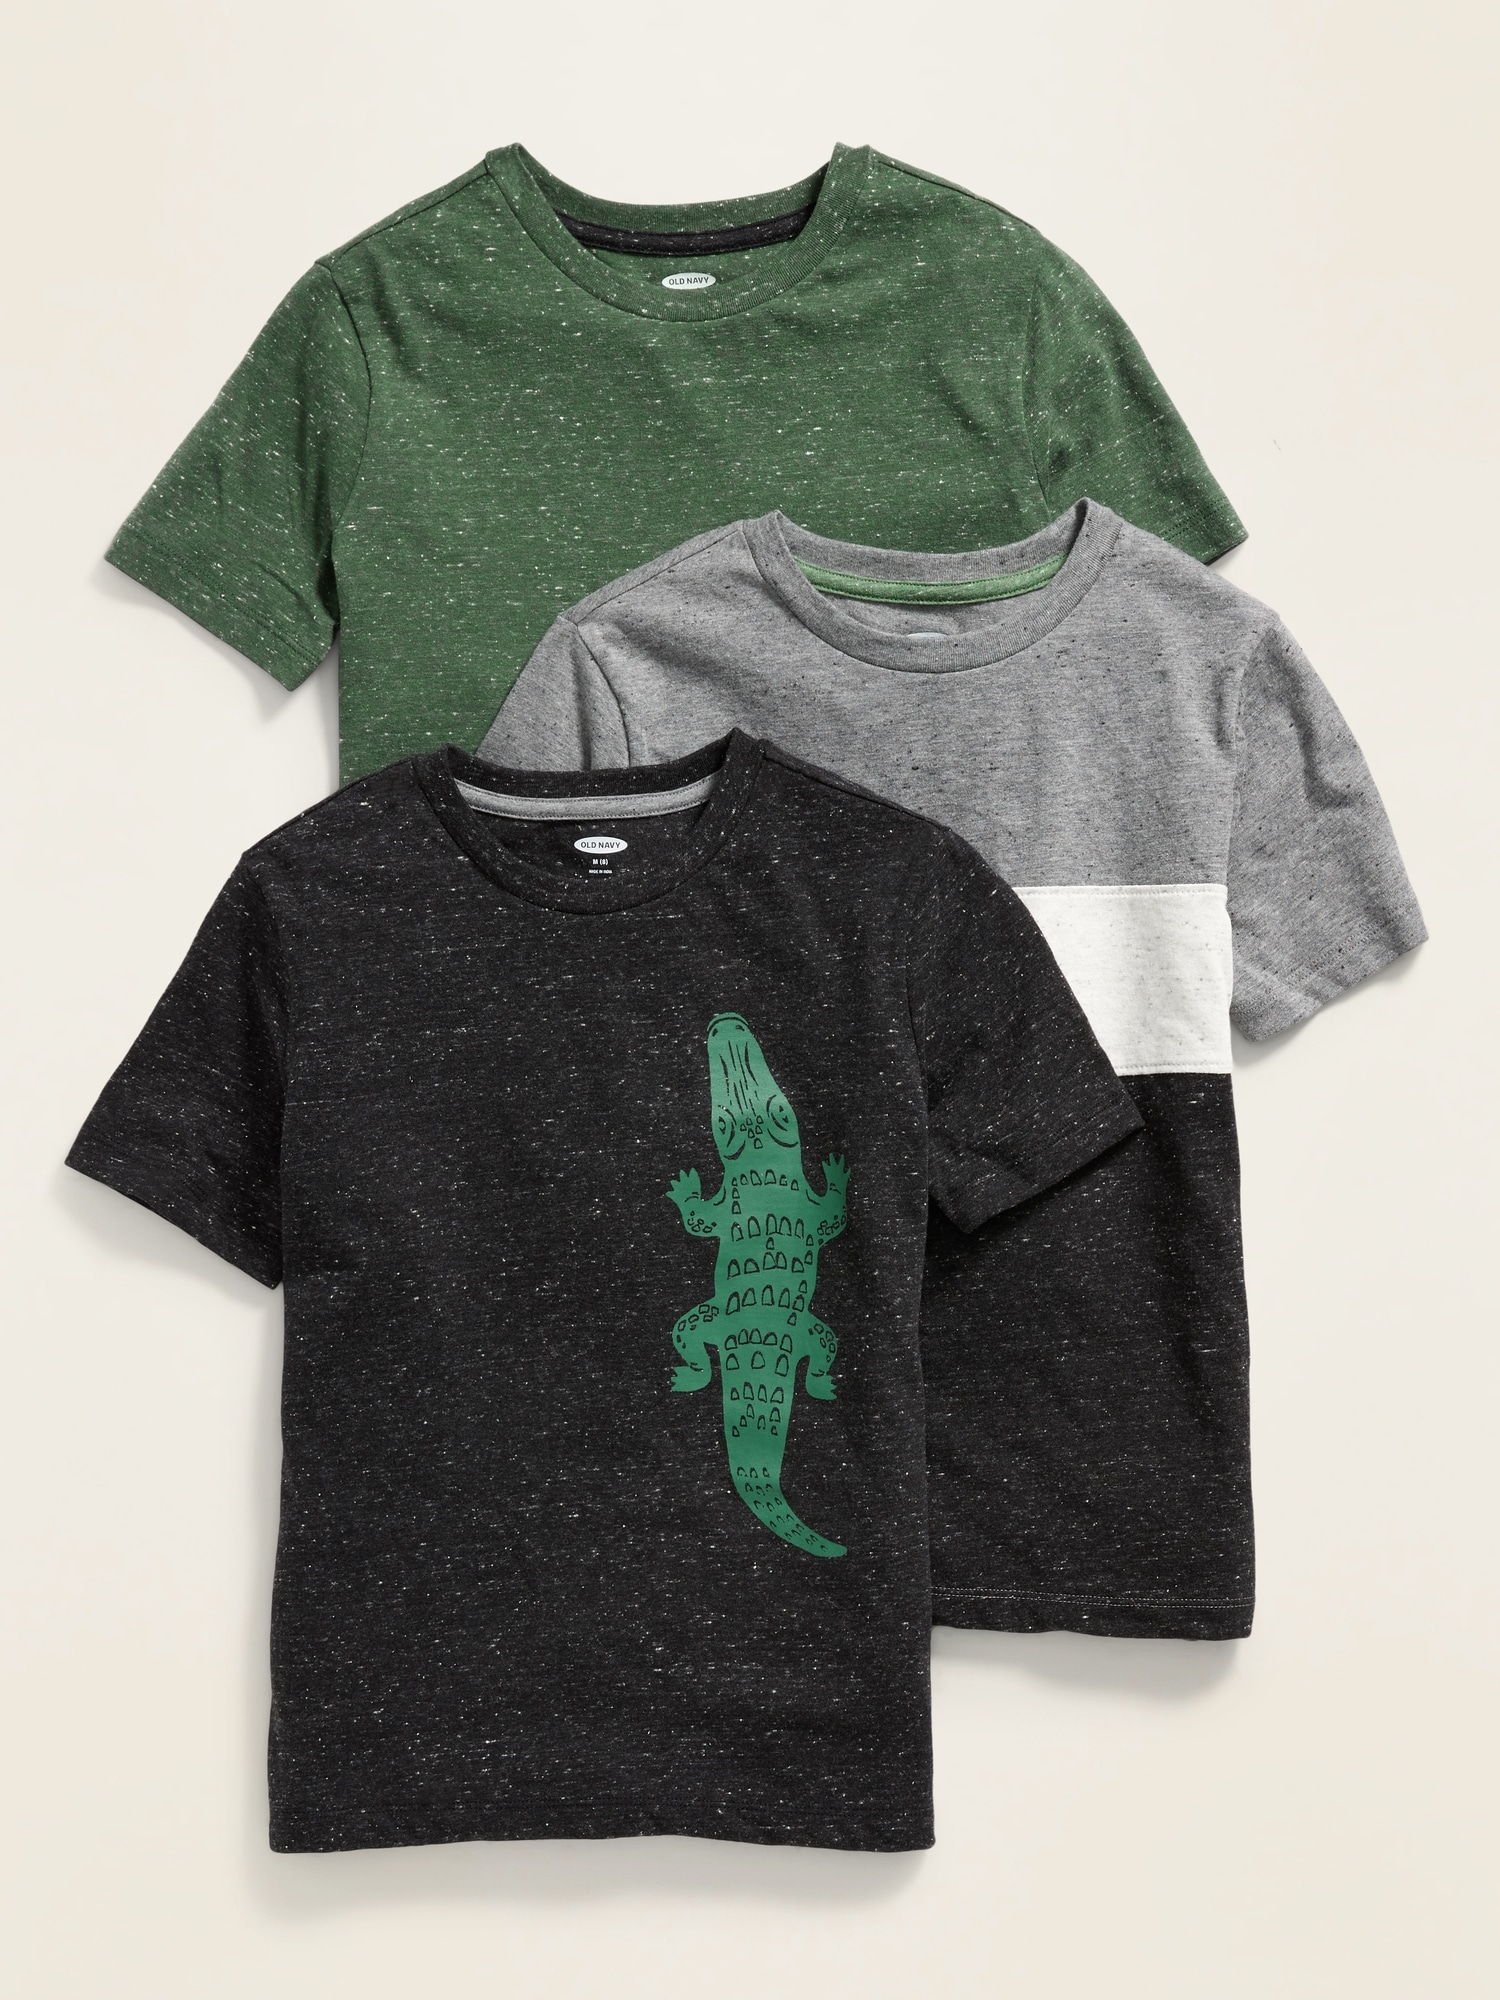 Vintage Crew-Neck Tee 3-Pack for Boys   